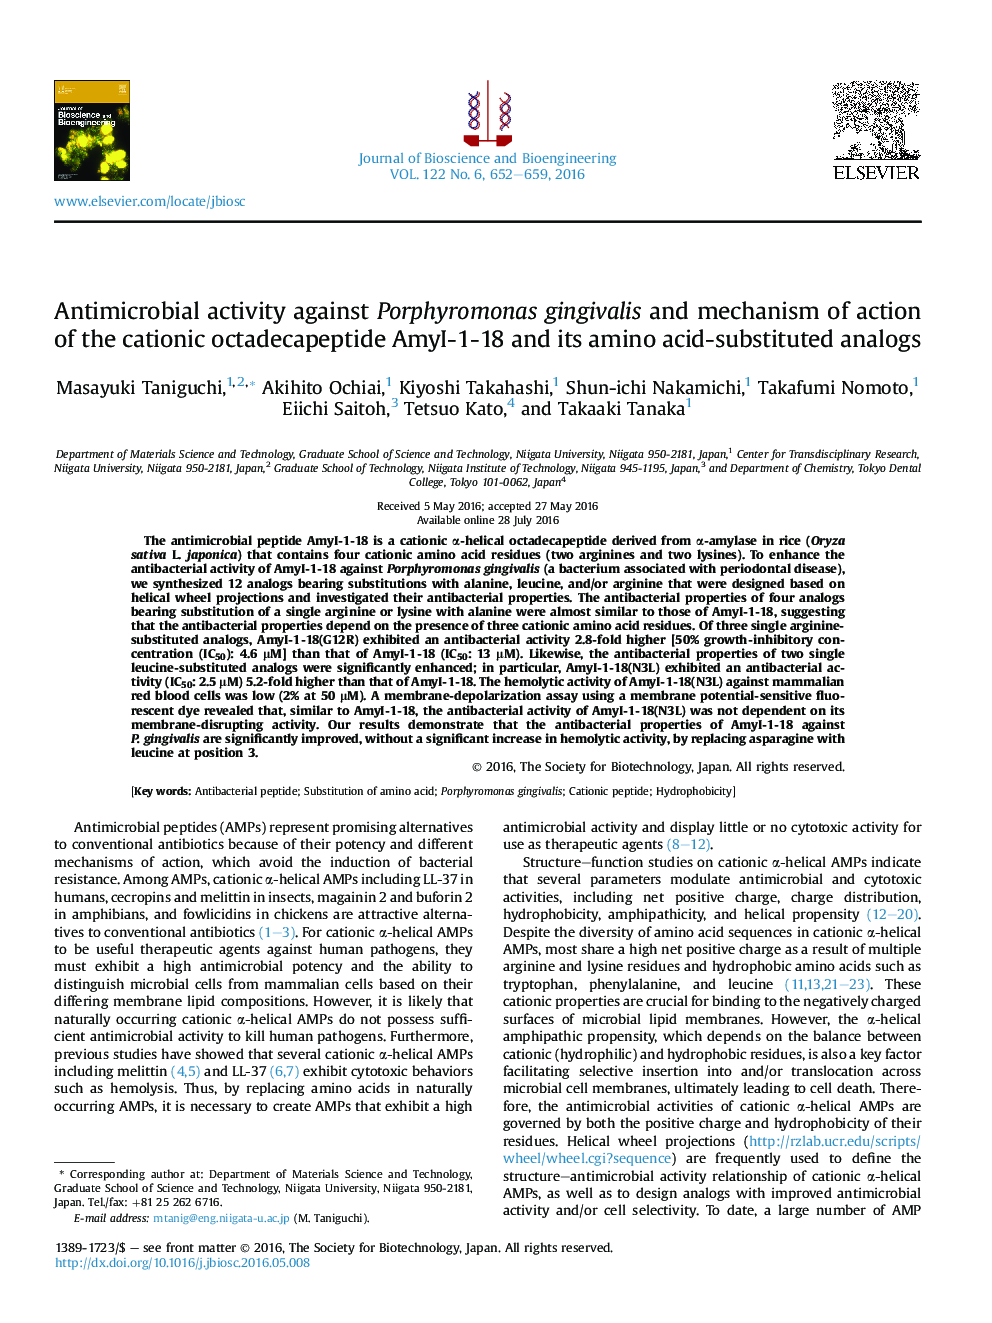 Antimicrobial activity against Porphyromonas gingivalis and mechanism of action of the cationic octadecapeptide AmyI-1-18 and its amino acid-substituted analogs